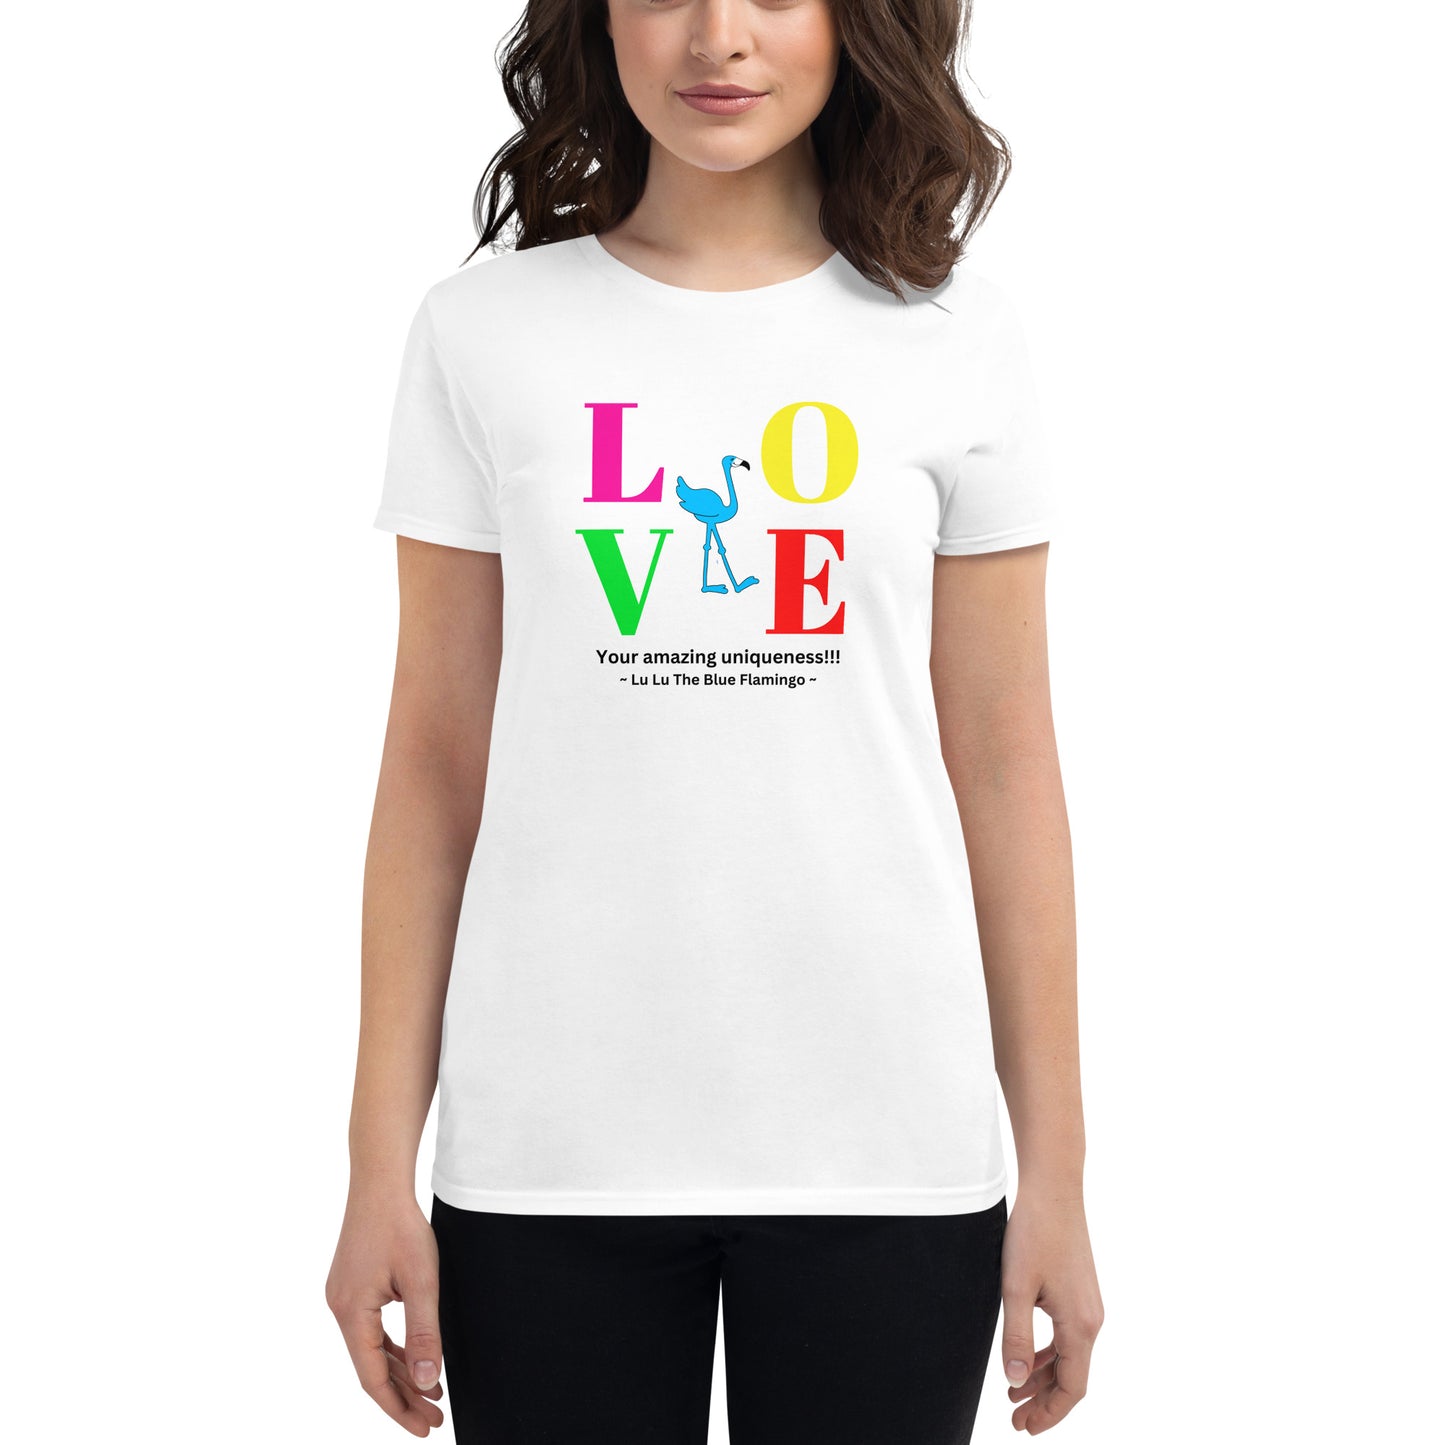 Lu Lu's "LOVE YOUR AMAZING UNIQUENESS" Women's Short Sleeve Fashion Fit T-Shirt - Cherish yourself and celebrate your uniqueness!!!